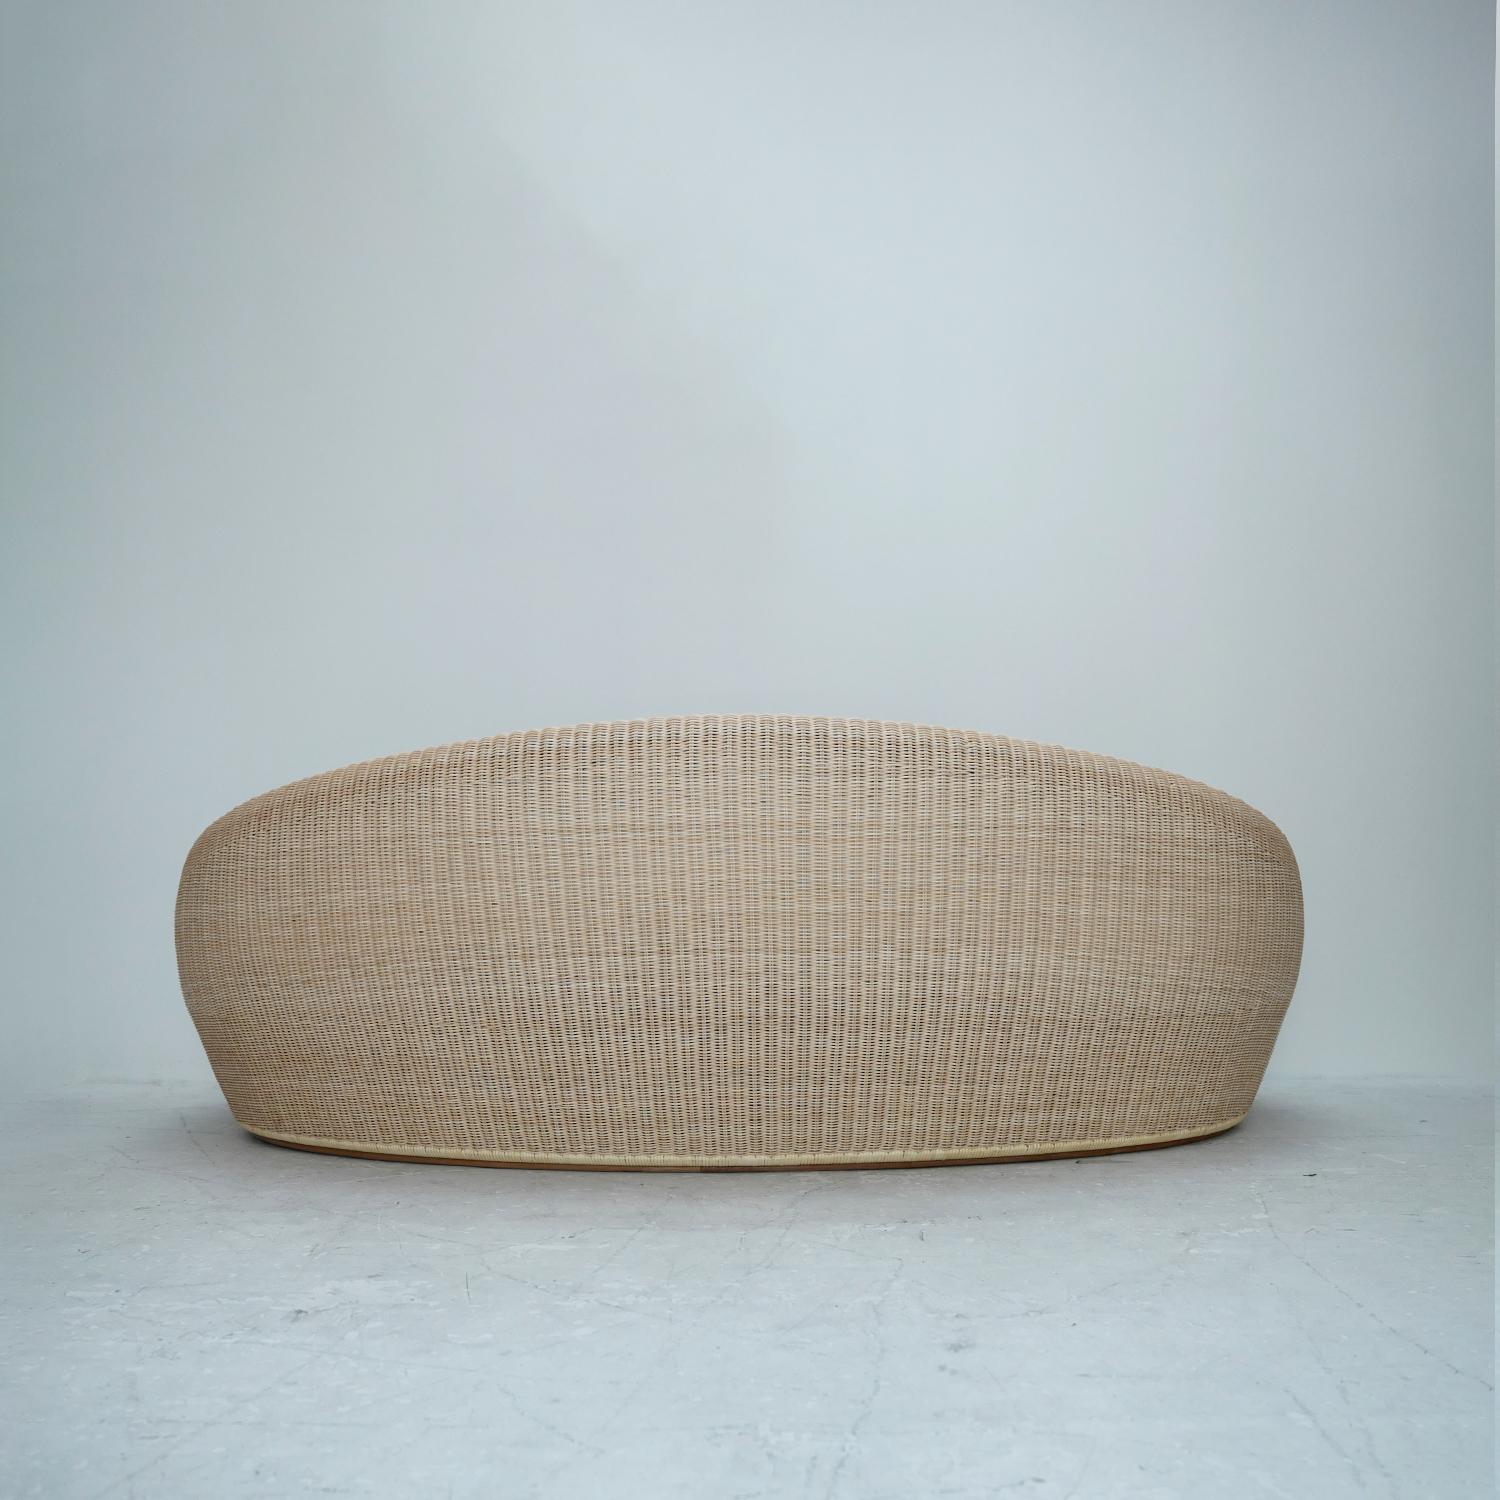 This is a custom-made model, exclusive to CASA DE, produced by YMK Nagaoka (formerly Yamakawa Rattan), which has been manufacturing rattan furniture since the 1950s. The supple curves, gentle colors of natural origin, and beauty that will never grow